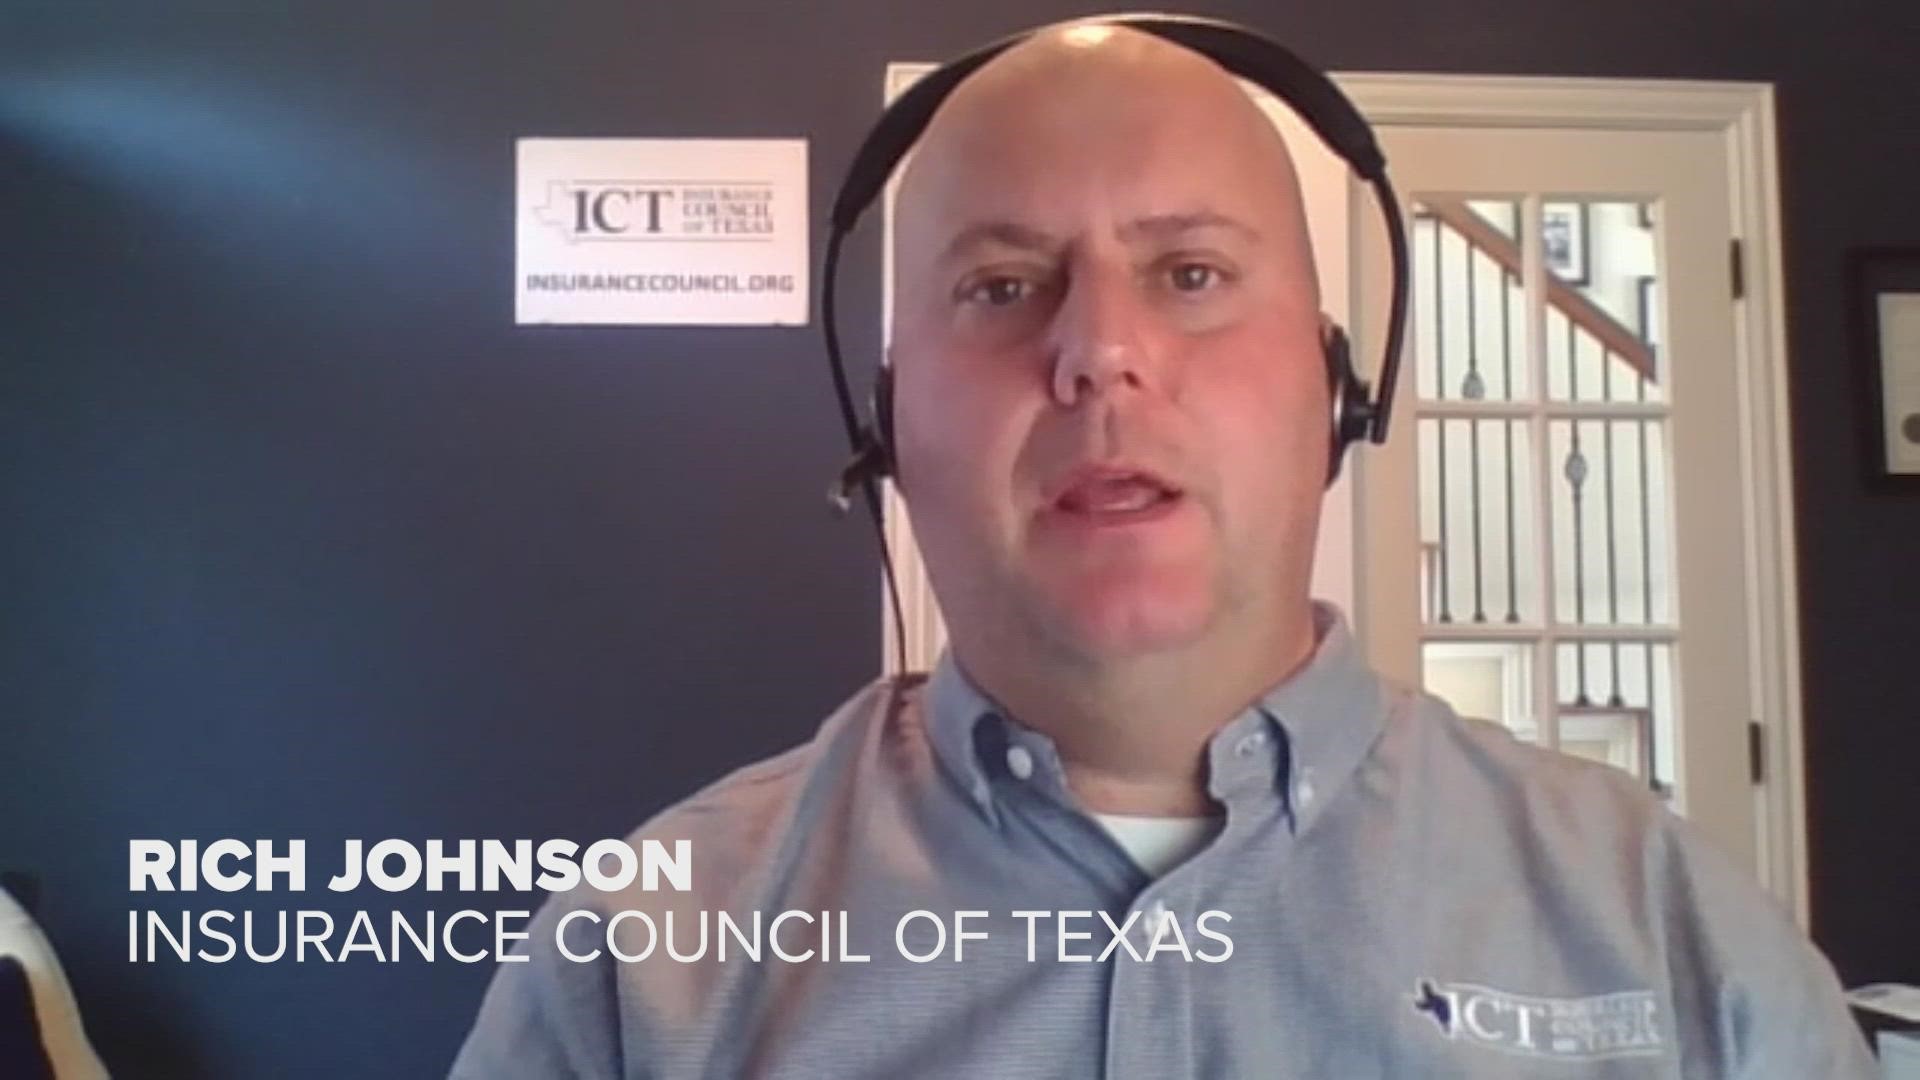 Rich Johnson is the communications director for the Insurance Council of Texas. He explains why car insurance rates are expected to increase in 2022.